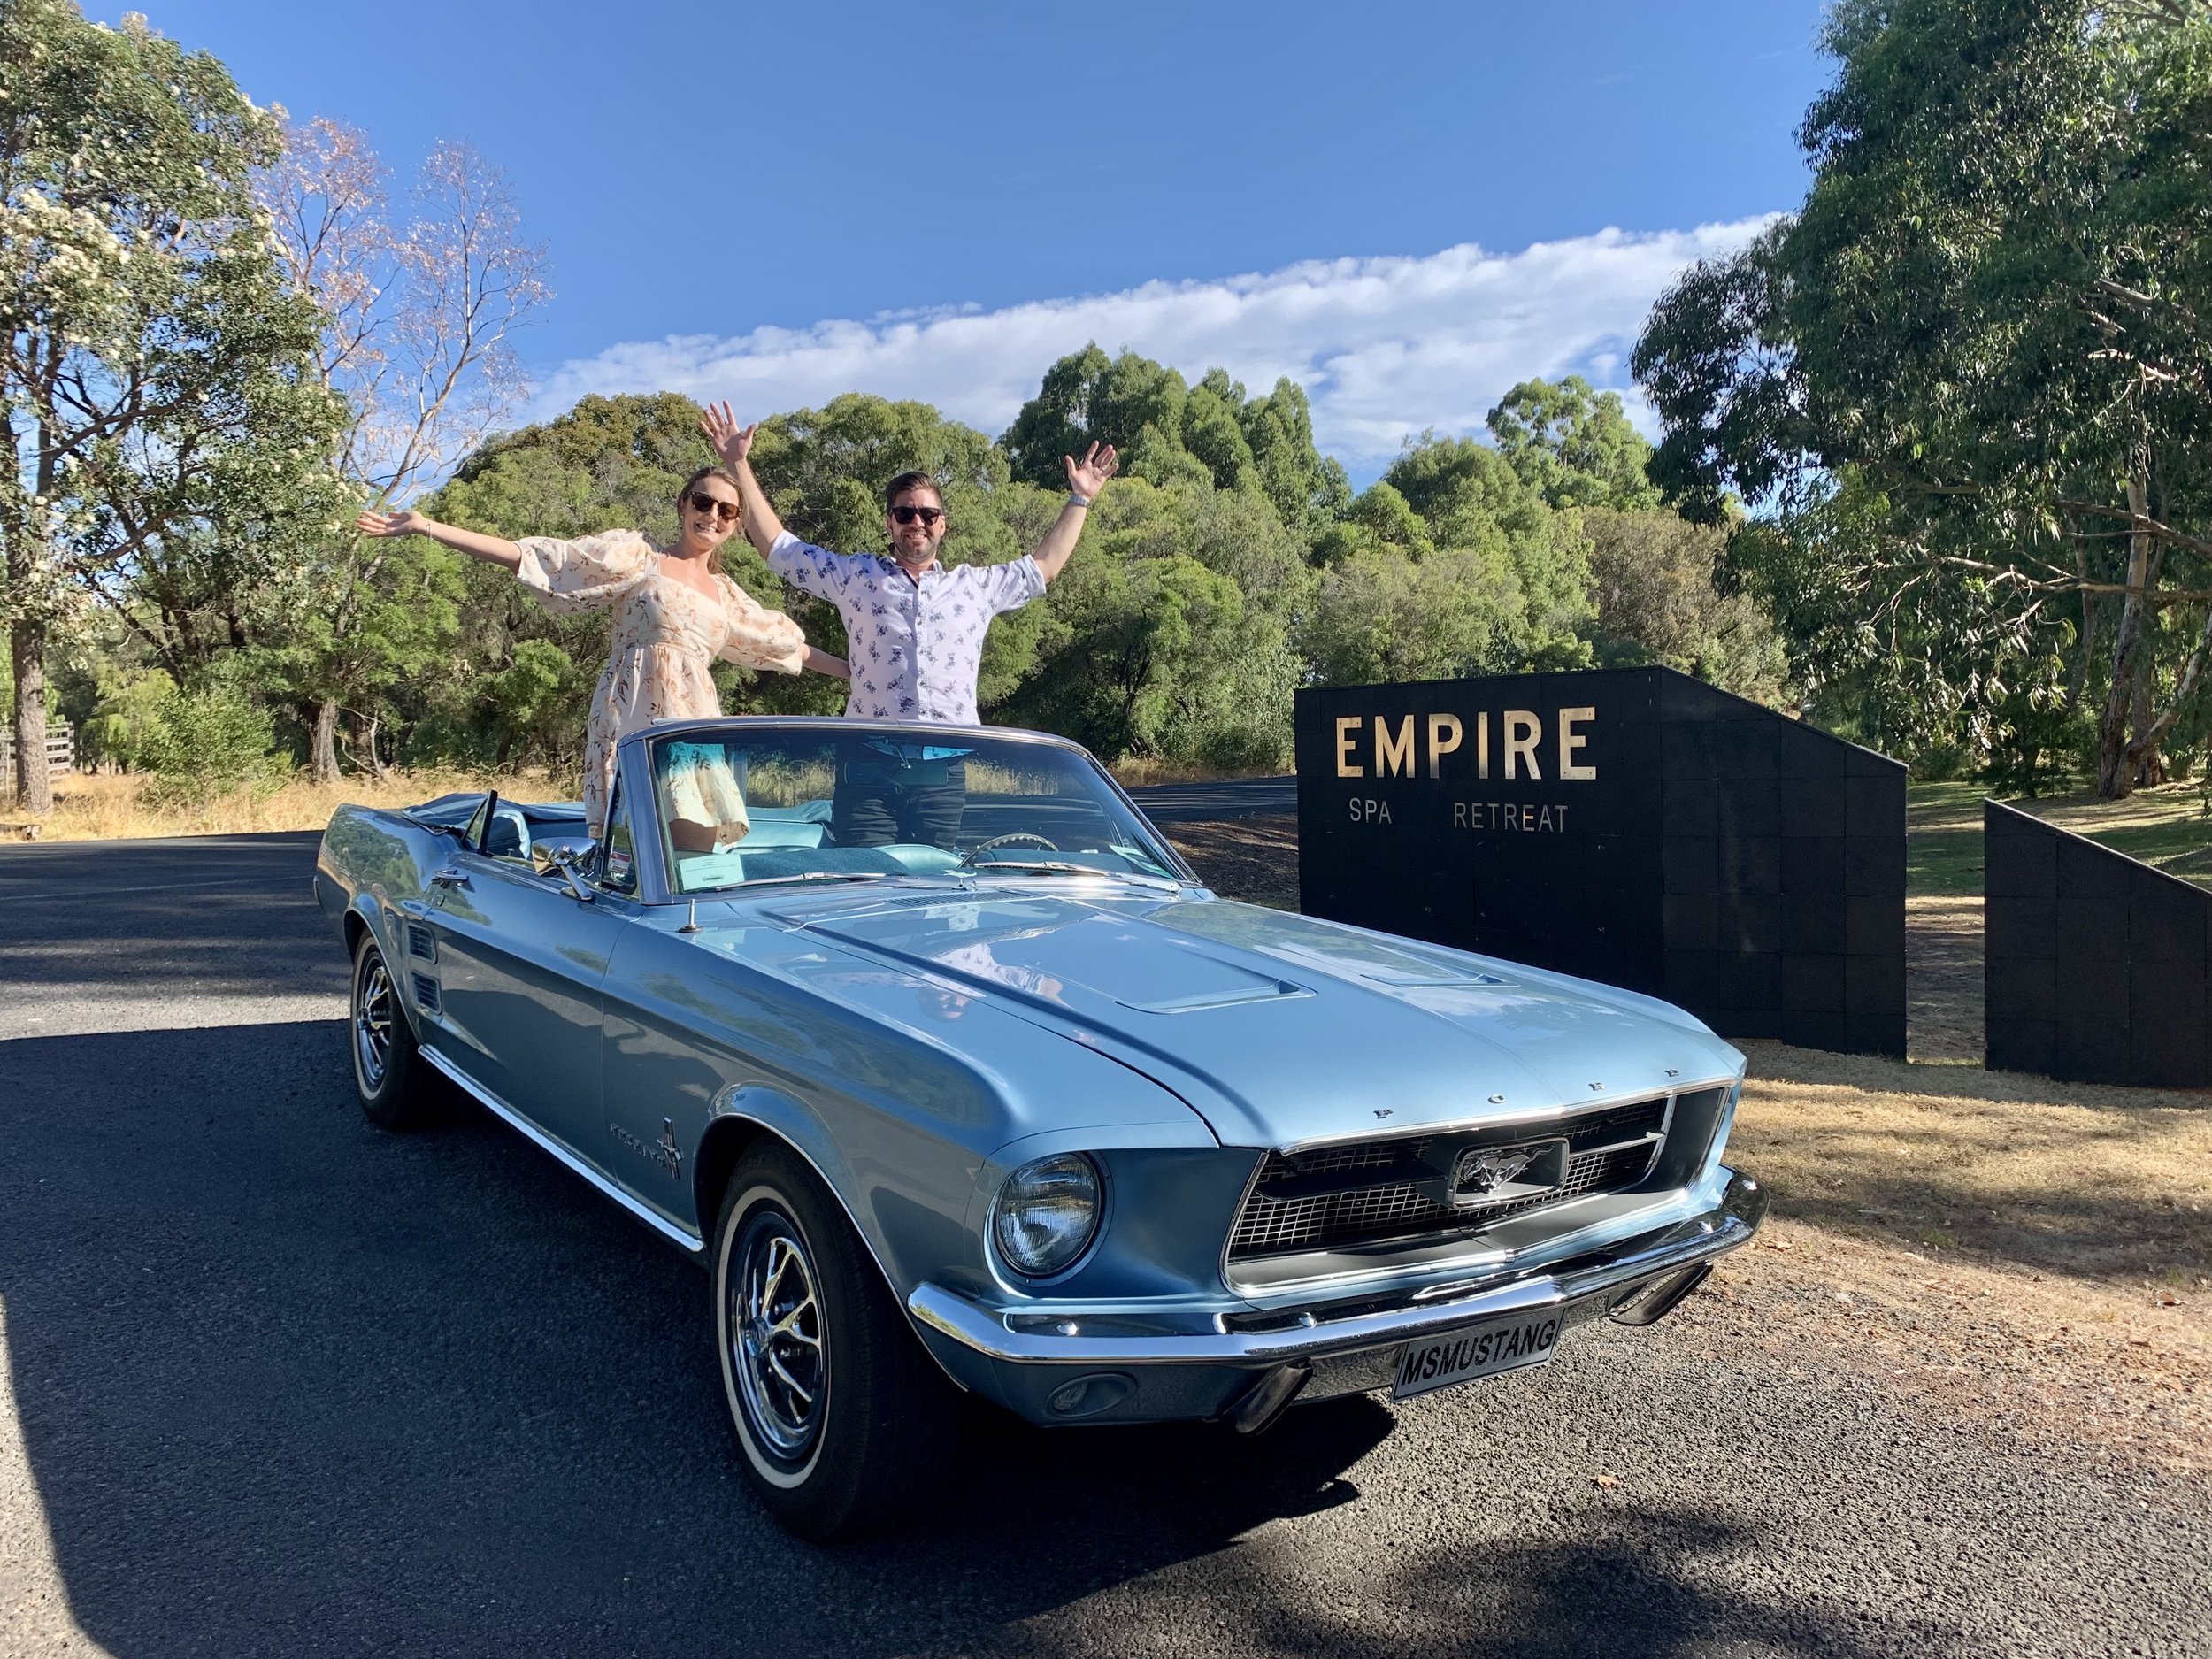 mr mustang hire-classic car-honeymoon-wedding-private driver-chauffeur-margaret river-south west-empire spa retreat2.JPG